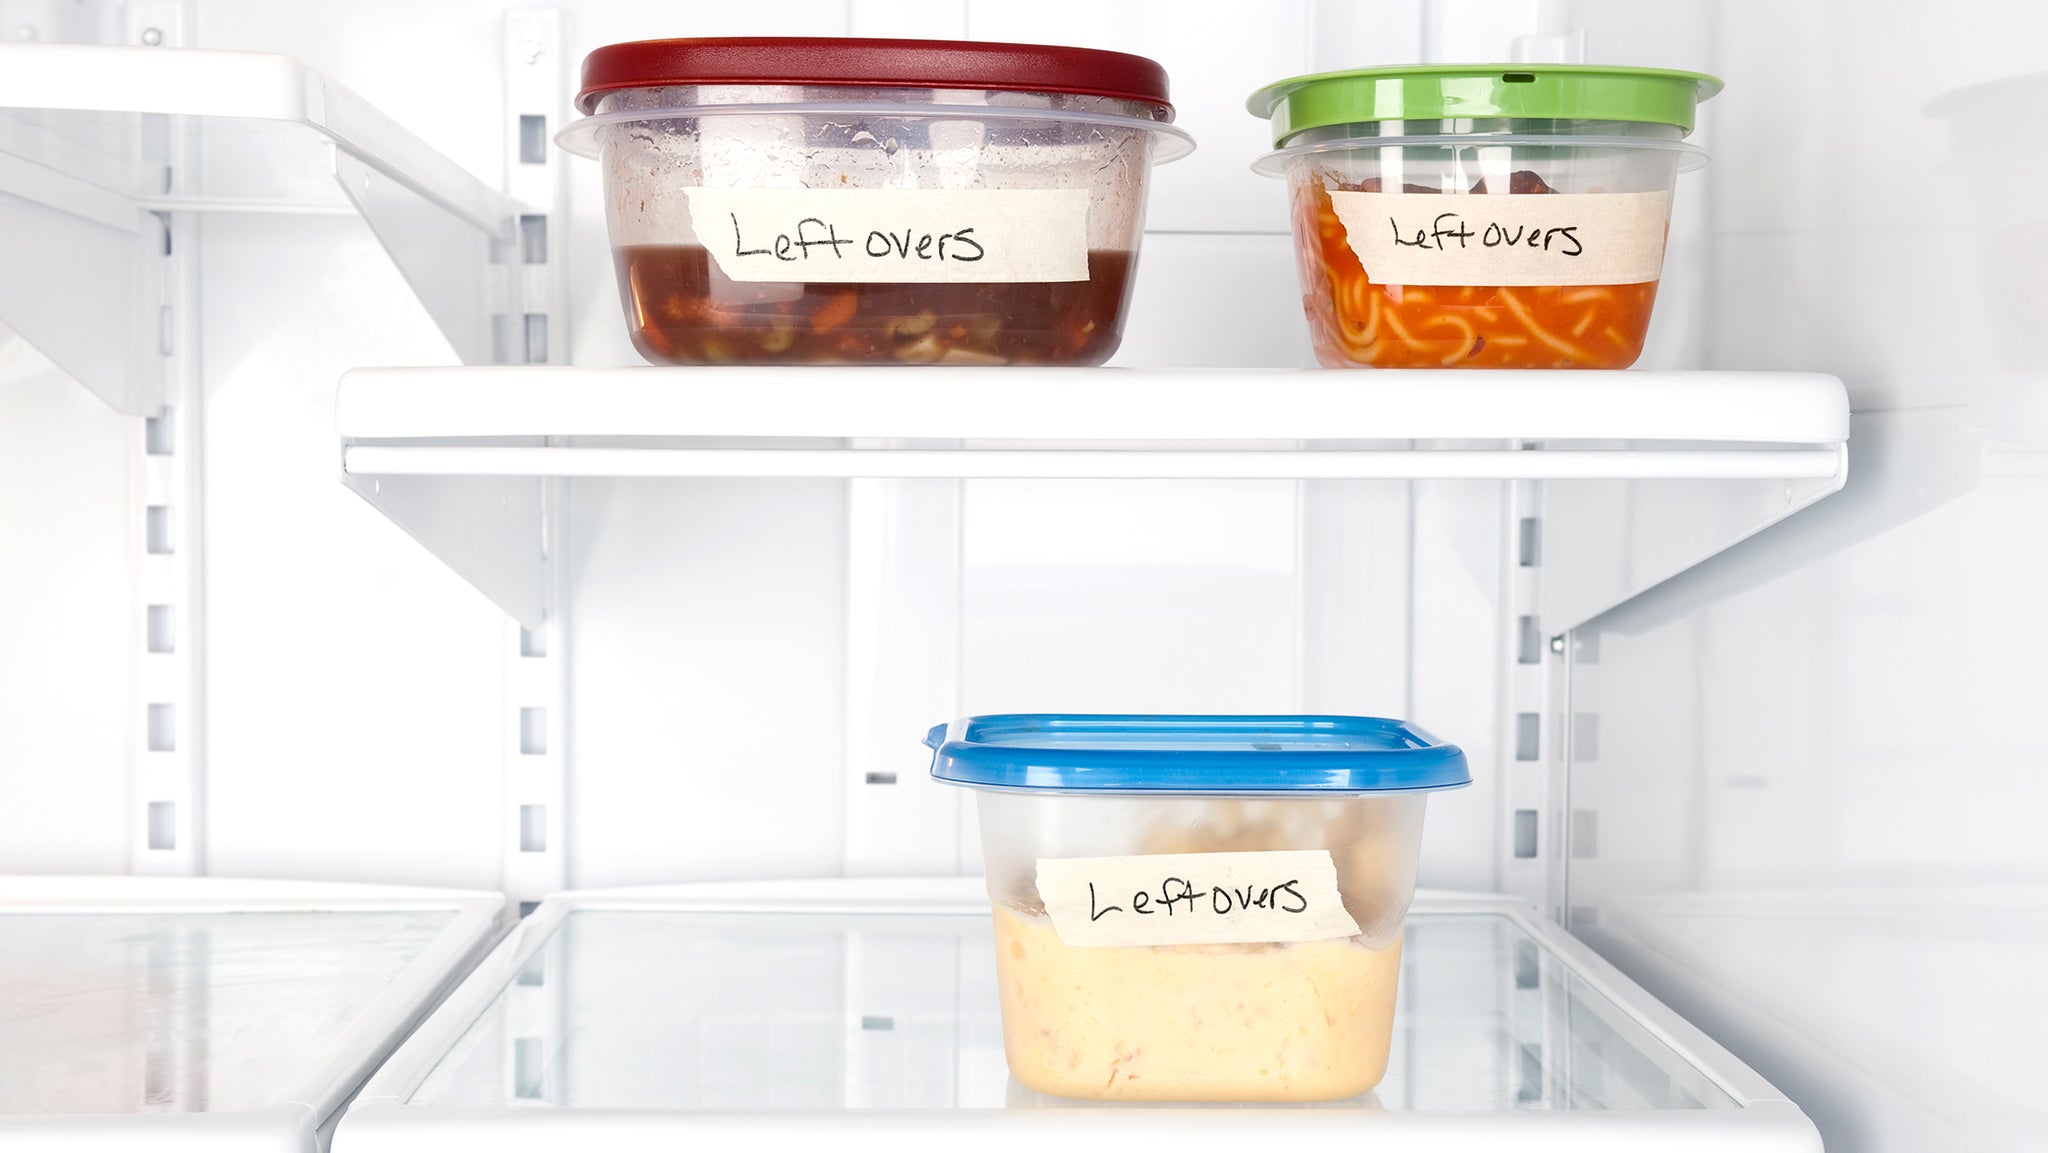 6 Food Safety Tips for Leftovers